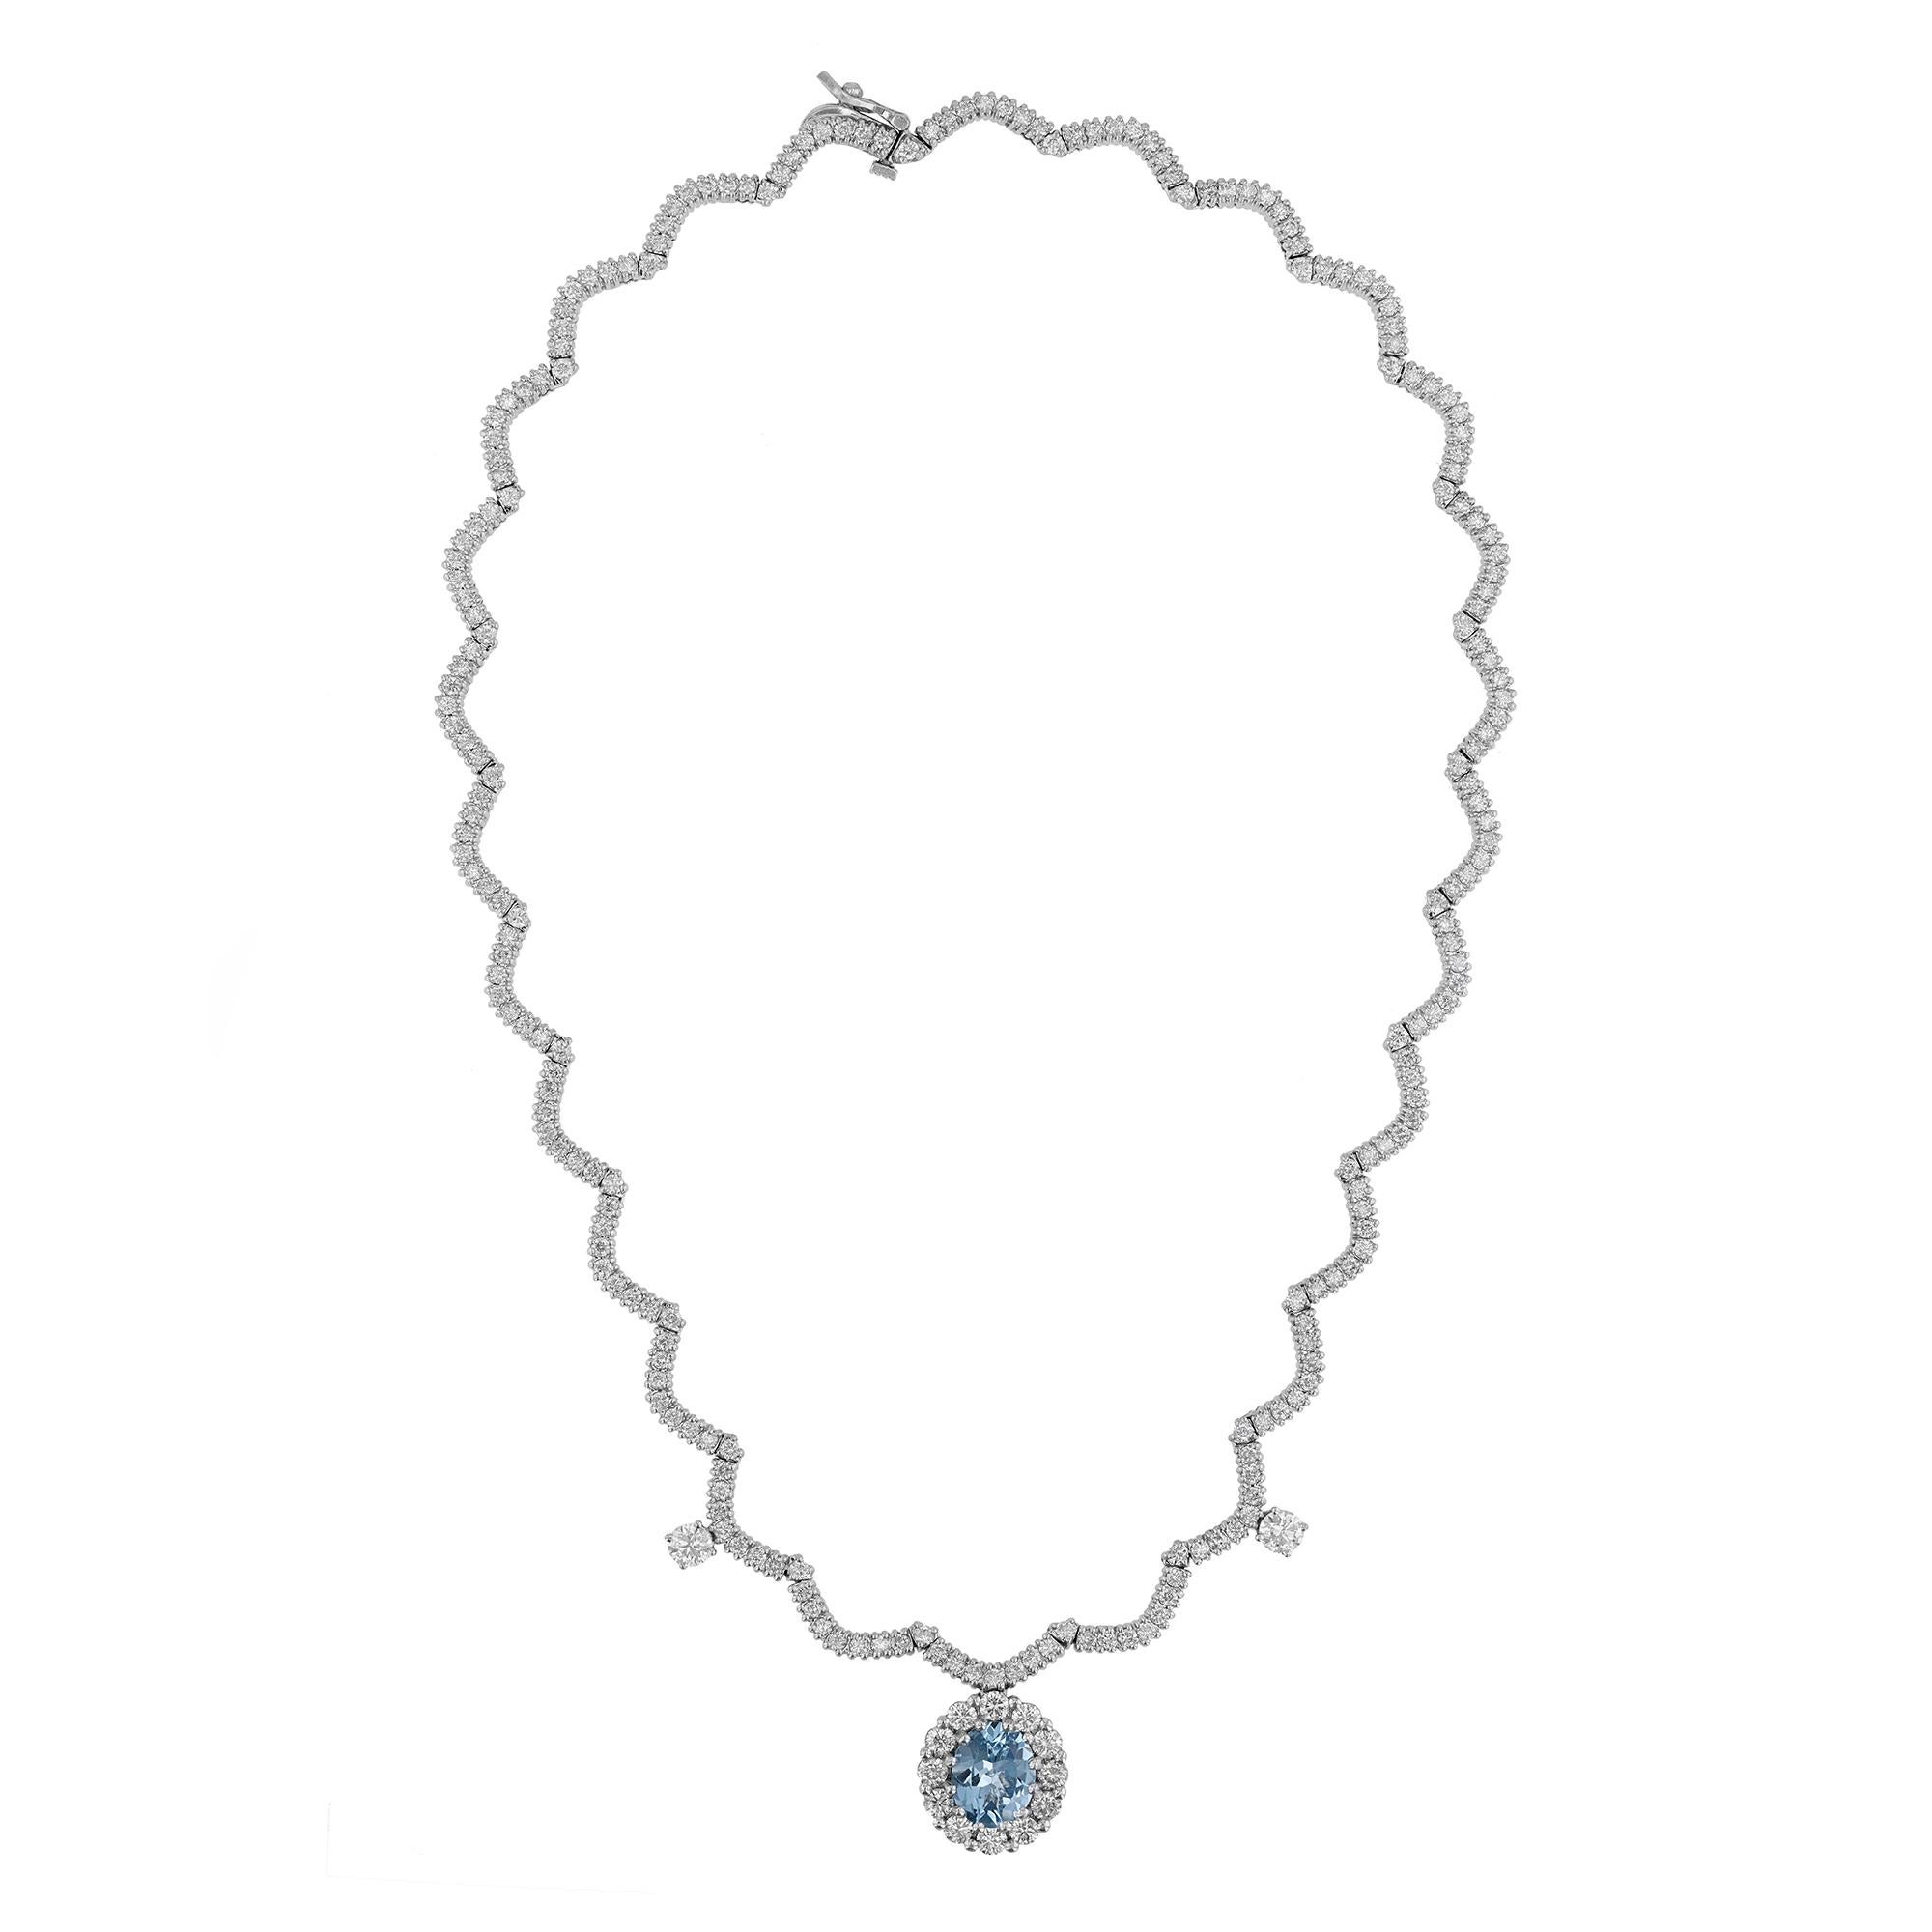 This necklace is made in 14K white gold and features an oval cut, 2.58 carat aquamarine. Surrounded by a halo and scalloped style necklace of 238 round cut. Diamonds weighing 8.20 carats combined.  Necklace has a color grade (H). and clarity grade